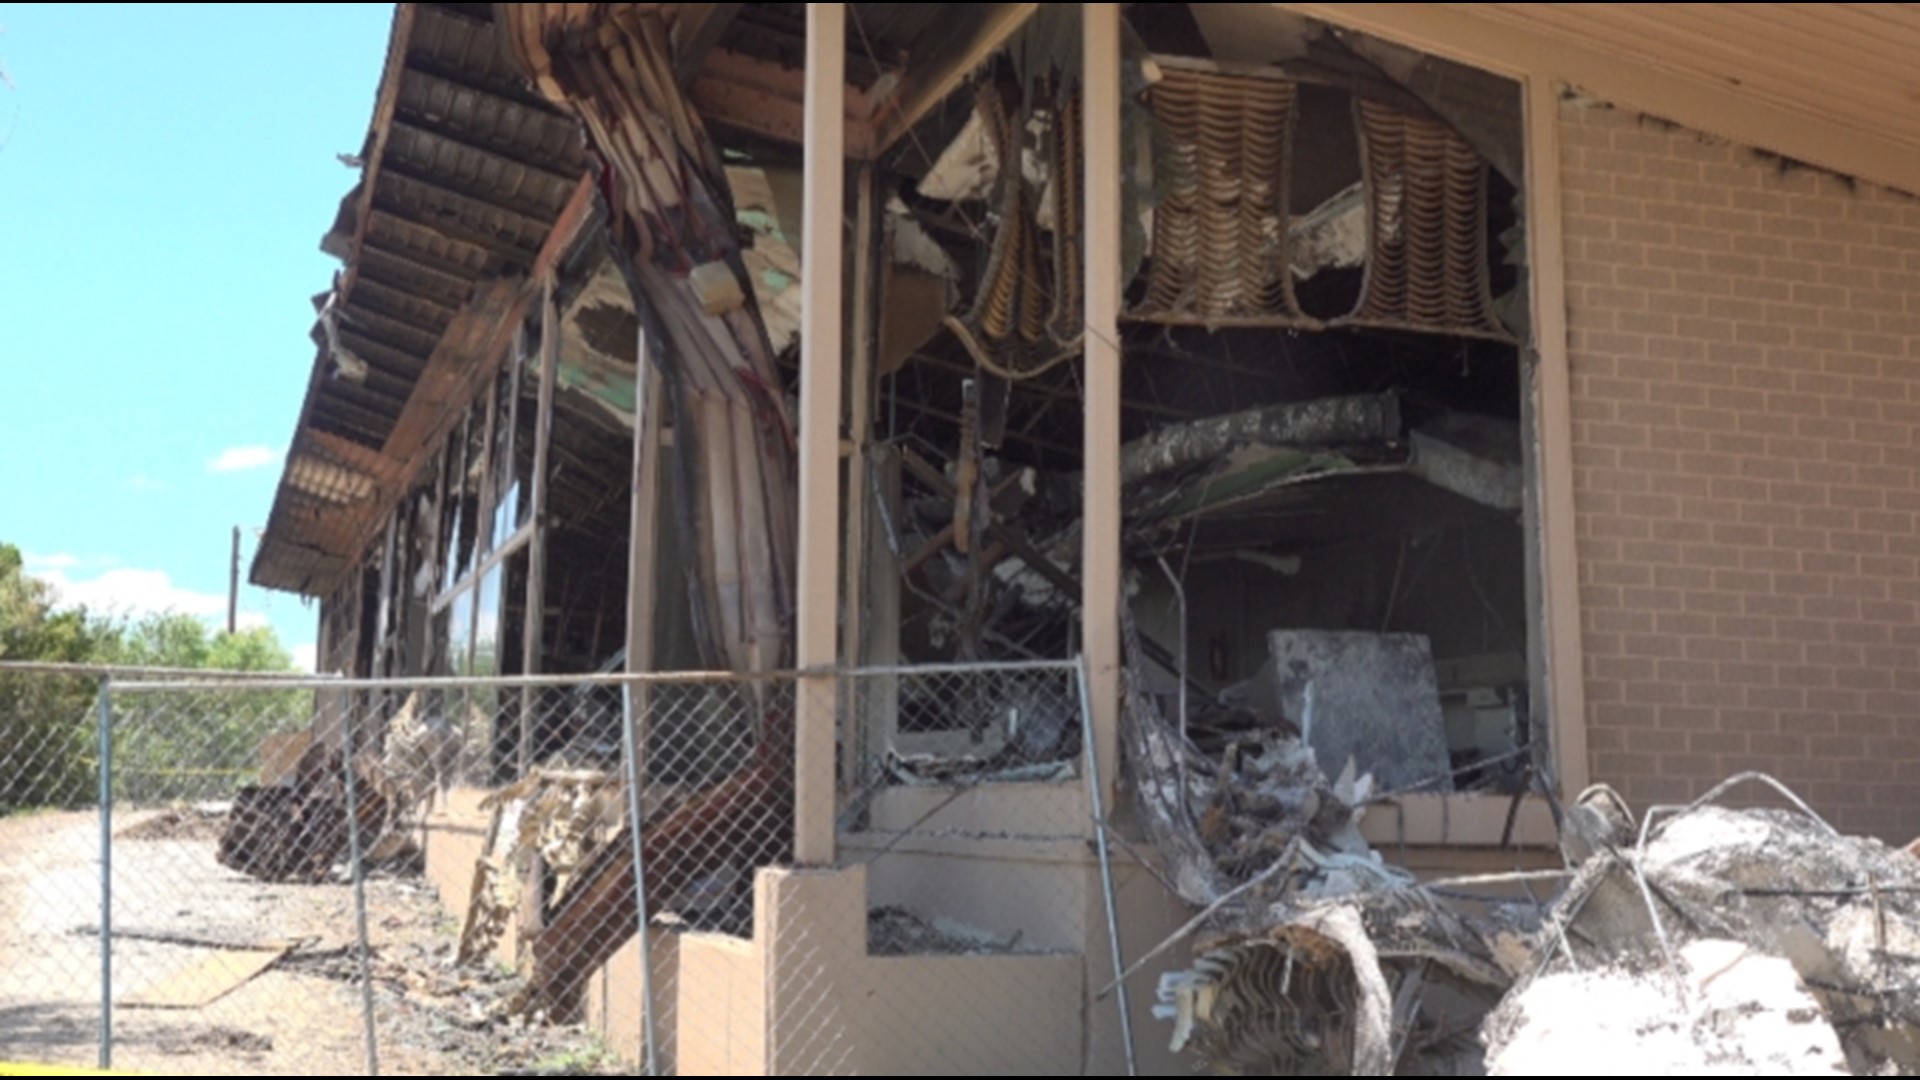 The incident occurred on July 1 at 4:45 a.m. and the building was a total loss.